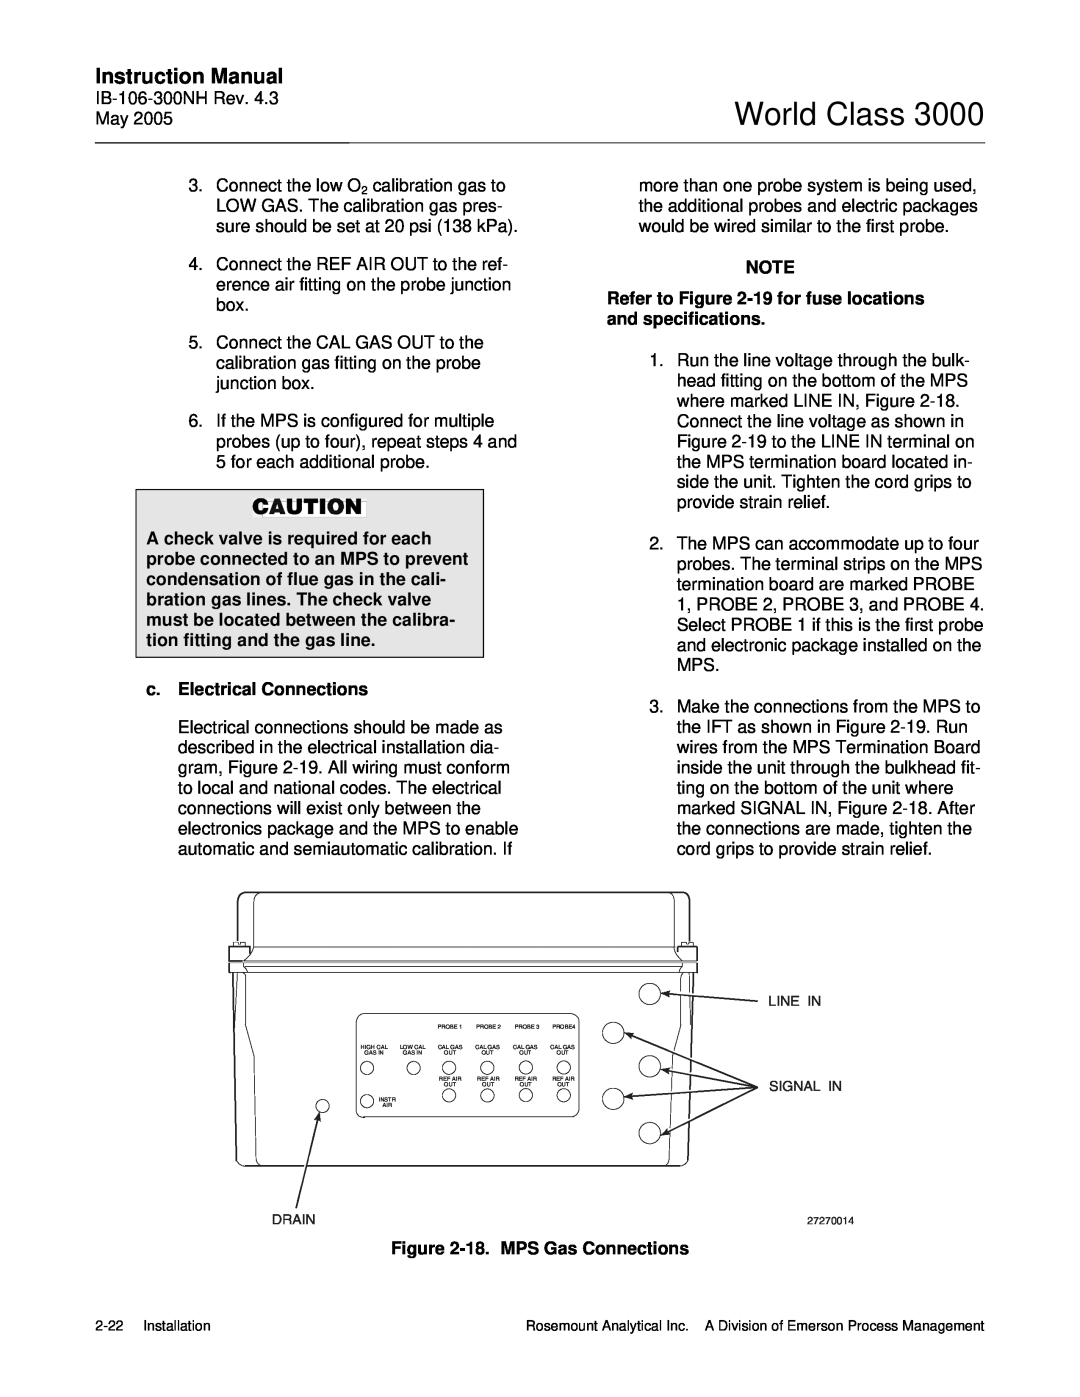 Emerson 3000 instruction manual World Class, Instruction Manual, c.Electrical Connections, 18.MPS Gas Connections 